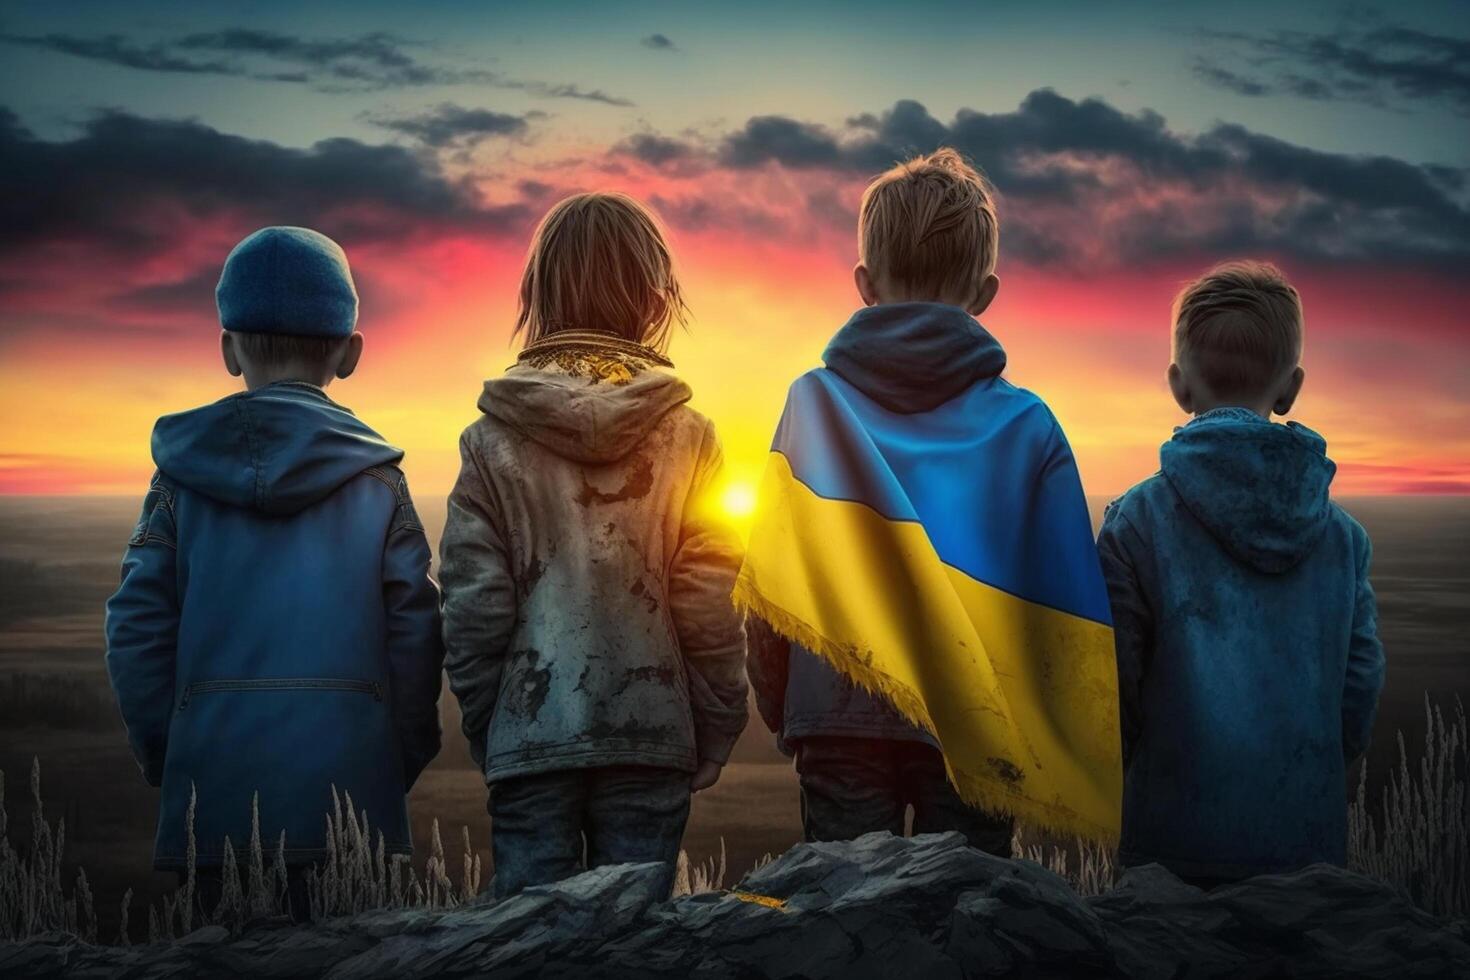 Futures of Freedom Children with Ukrainian Flags Gazing at Sunset, a Hopeful Symbol of a Brighter Tomorrow photo